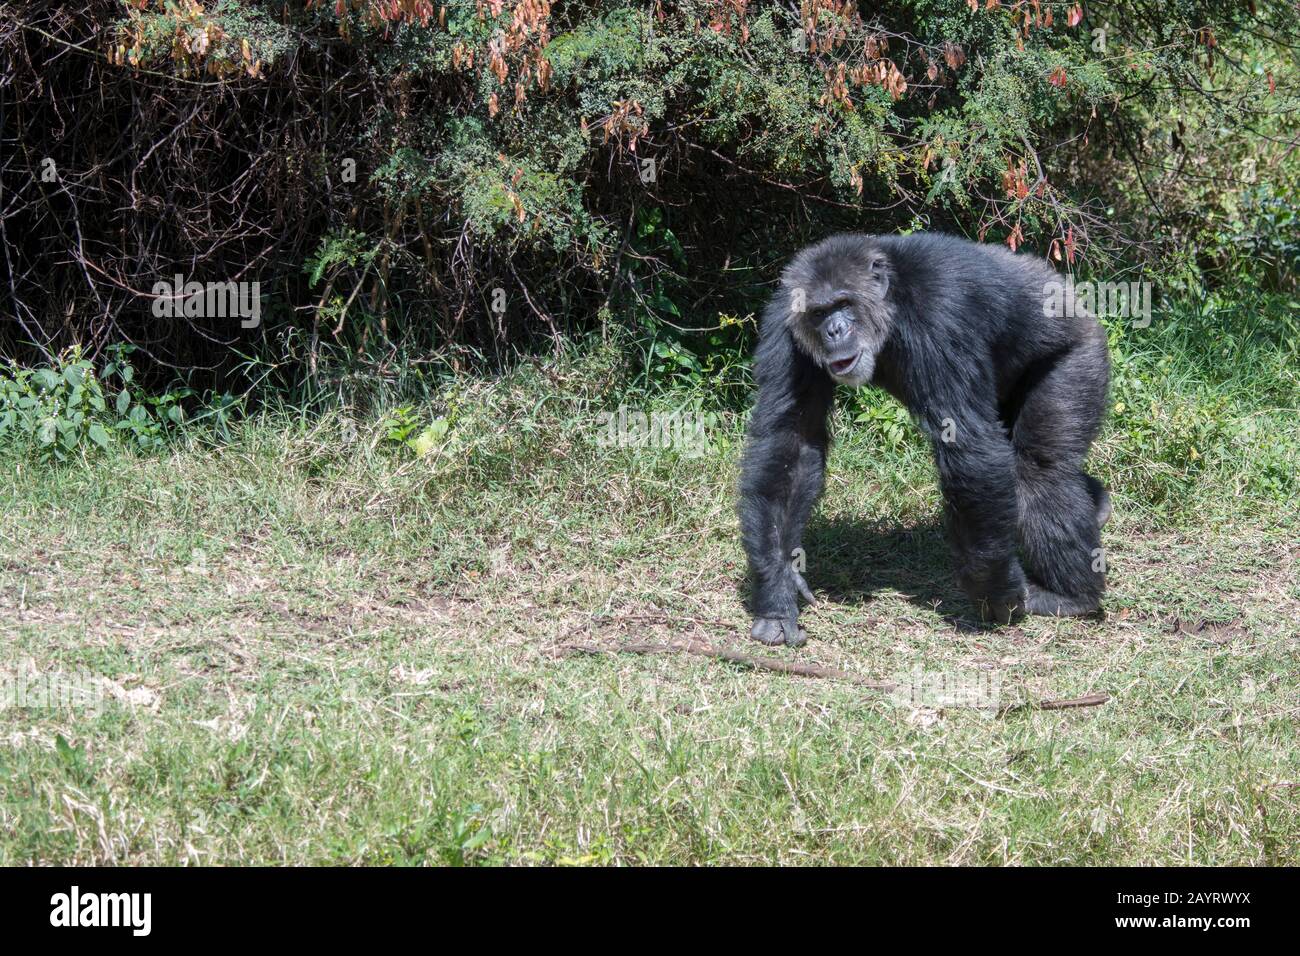 A Chimpanzee at the Sweetwaters Chimpanzee Sanctuary at Ol Pejeta Conservancy in Kenya. Stock Photo